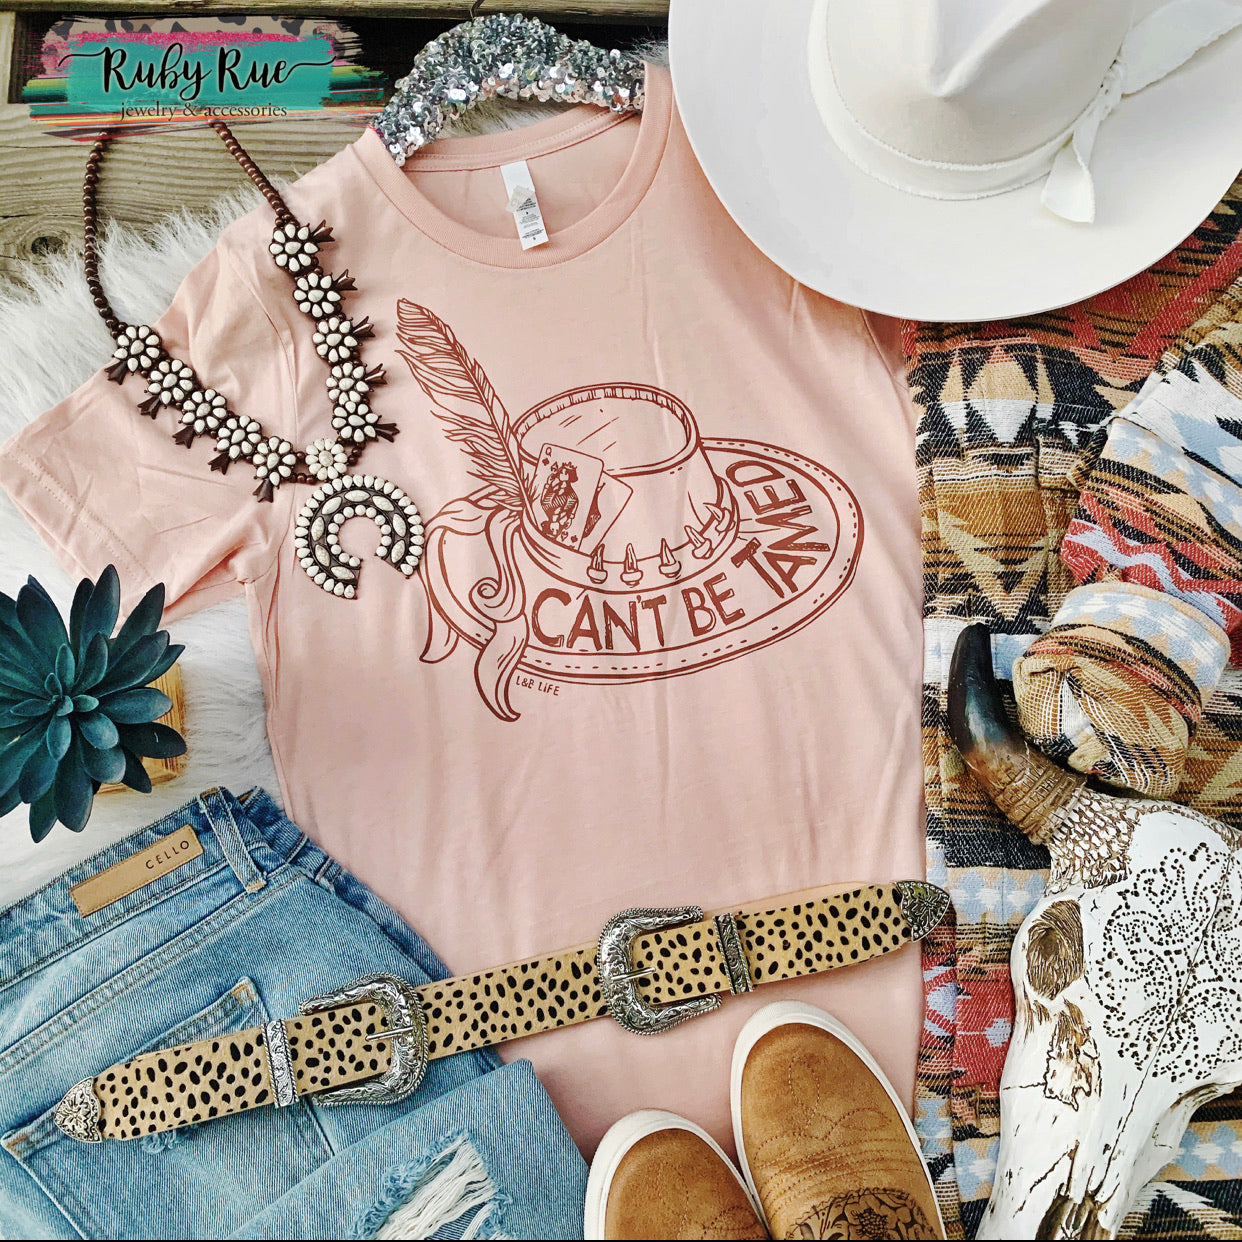 Can’t Be Tamed Tee - Ruby Rue Jewelry & Accessories